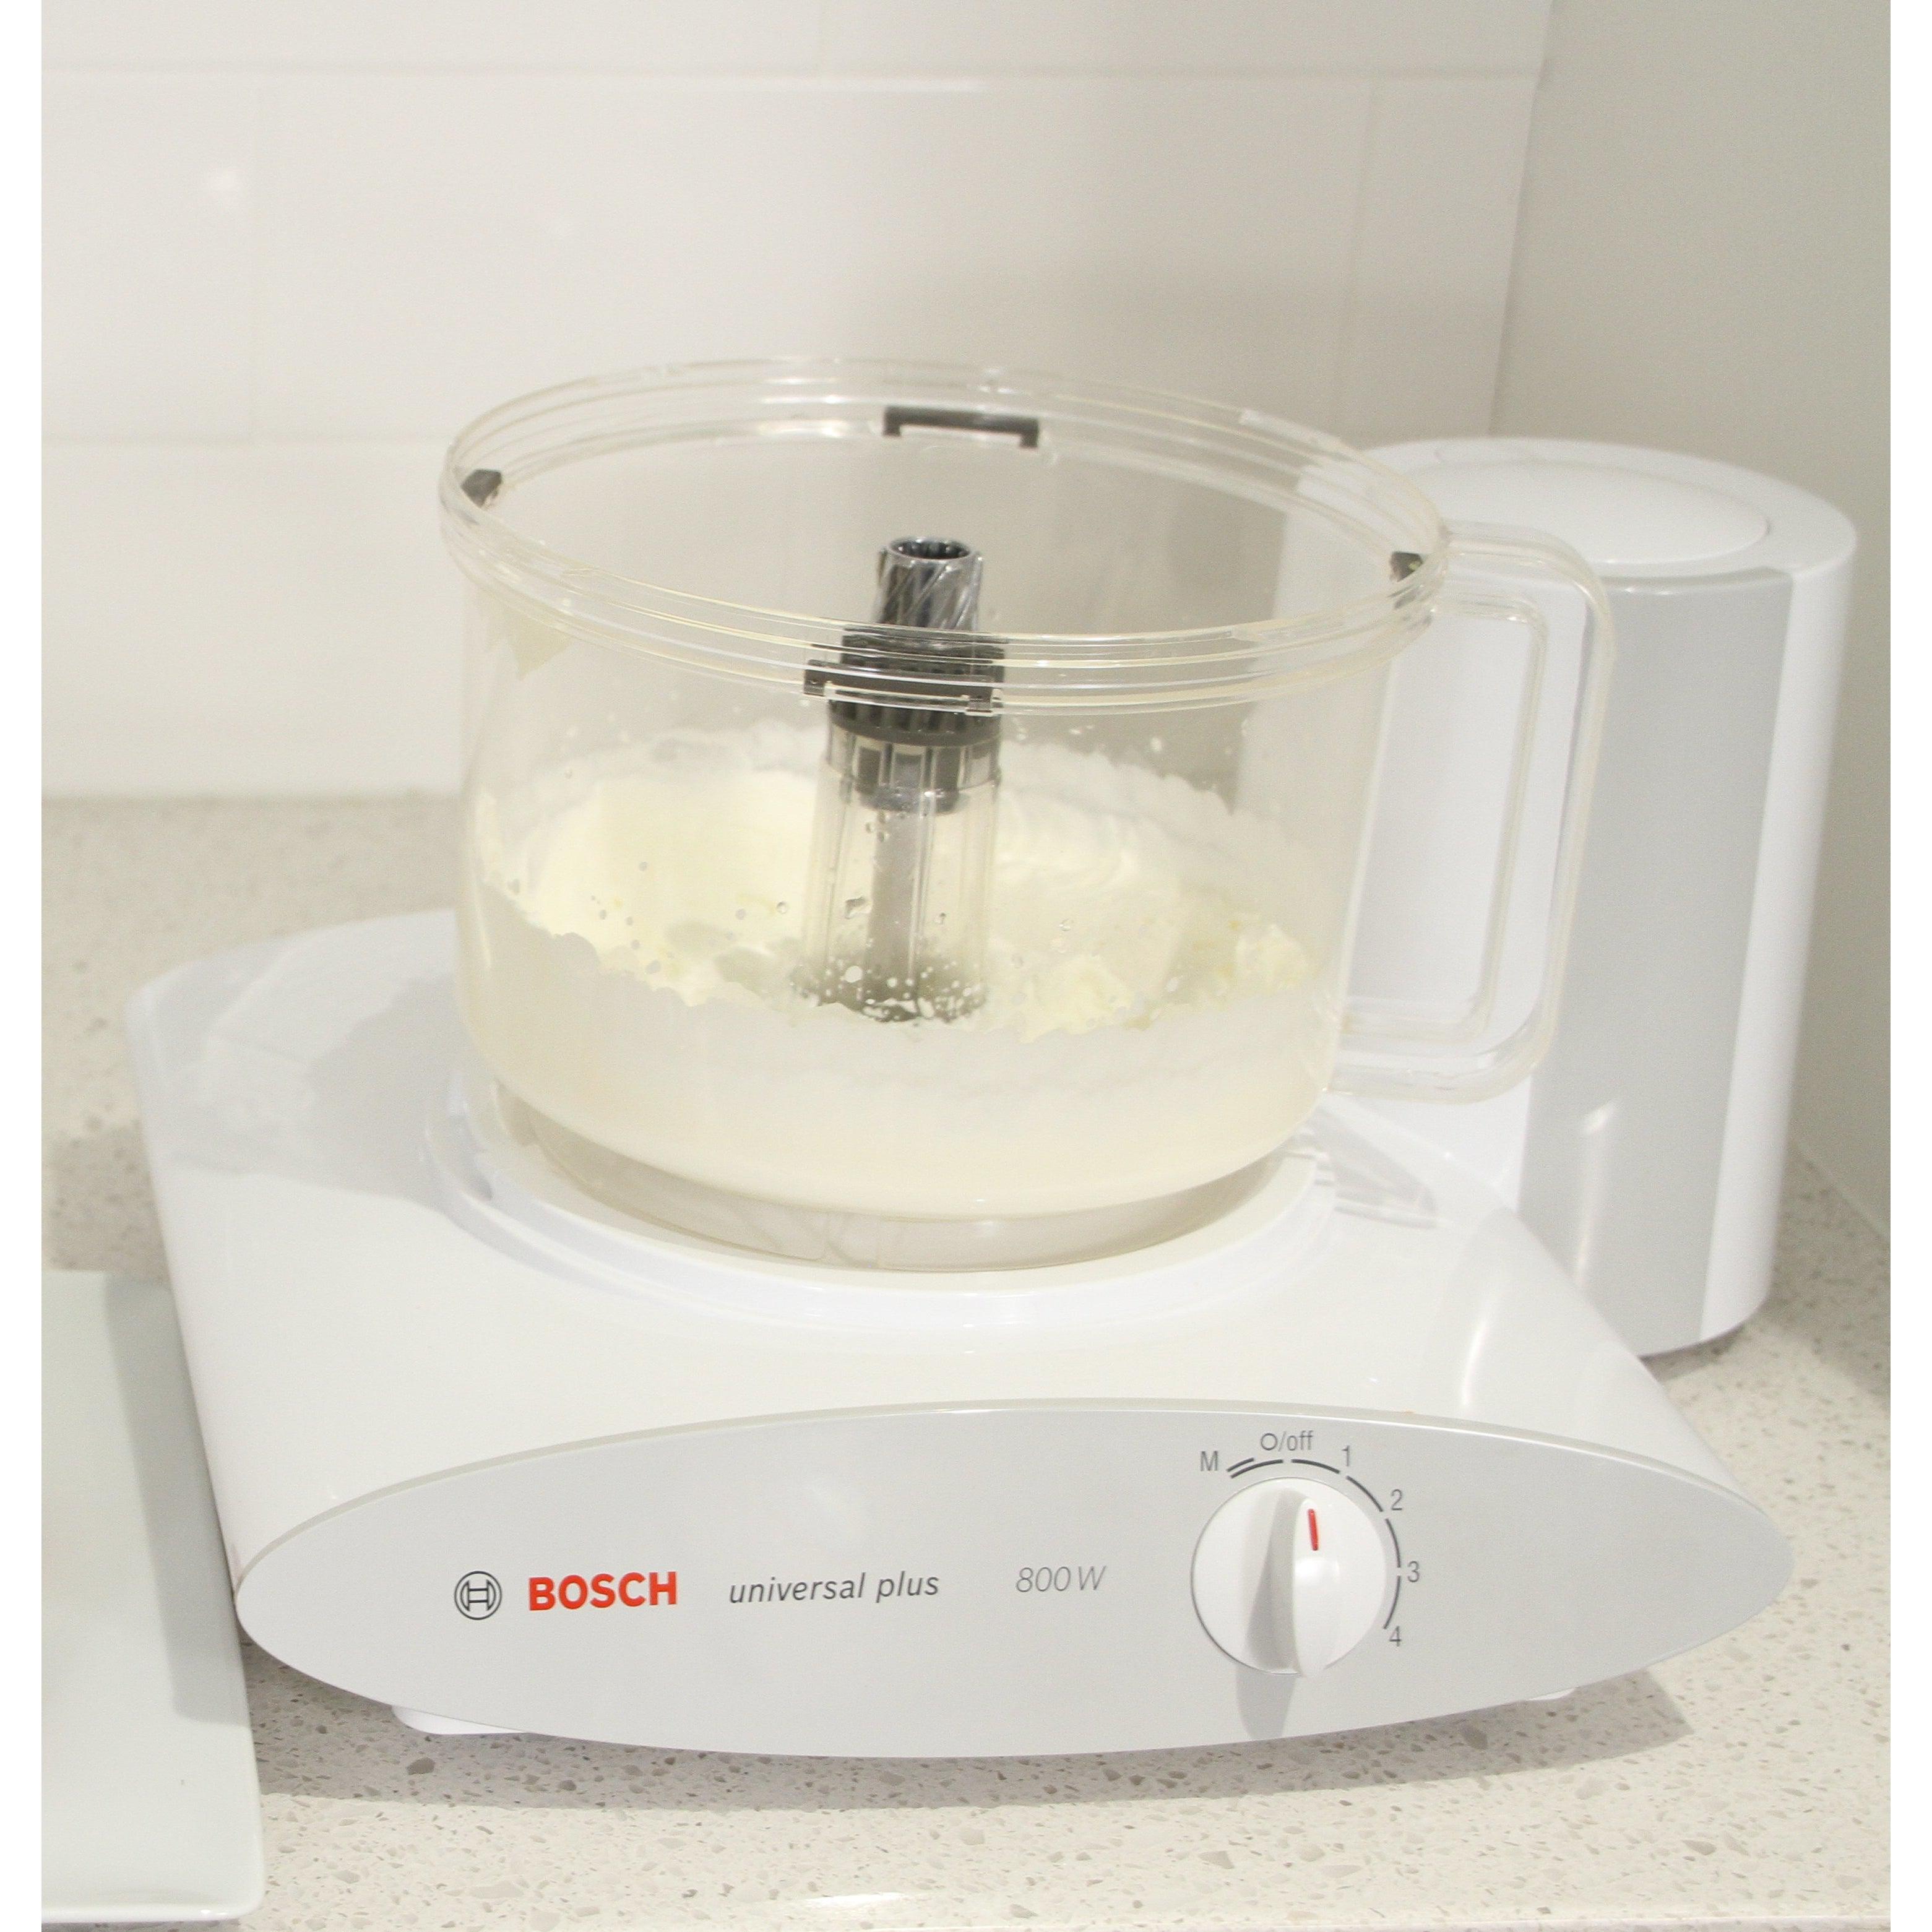 Bosch Universal Mixer 700W With Attachments Made in Germany for